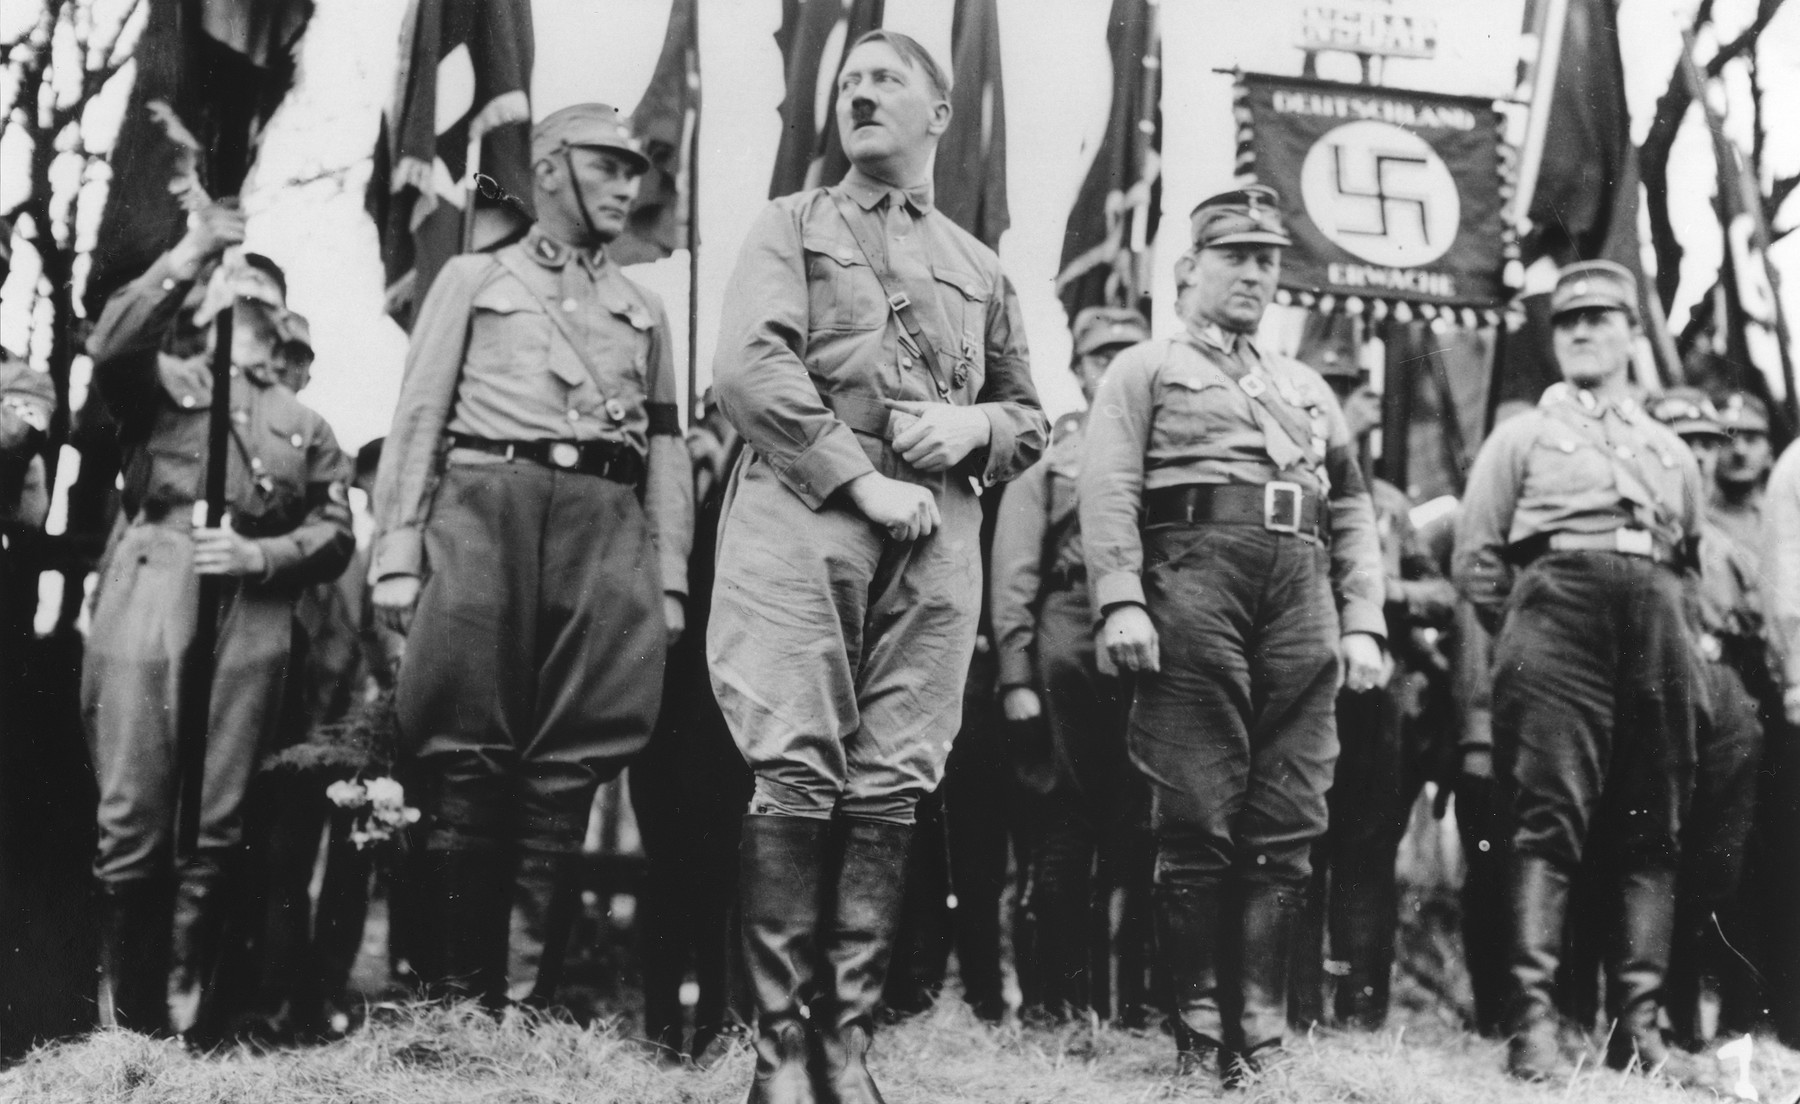 Adolf Hitler stands with an SA unit during a Nazi parade in Weimar